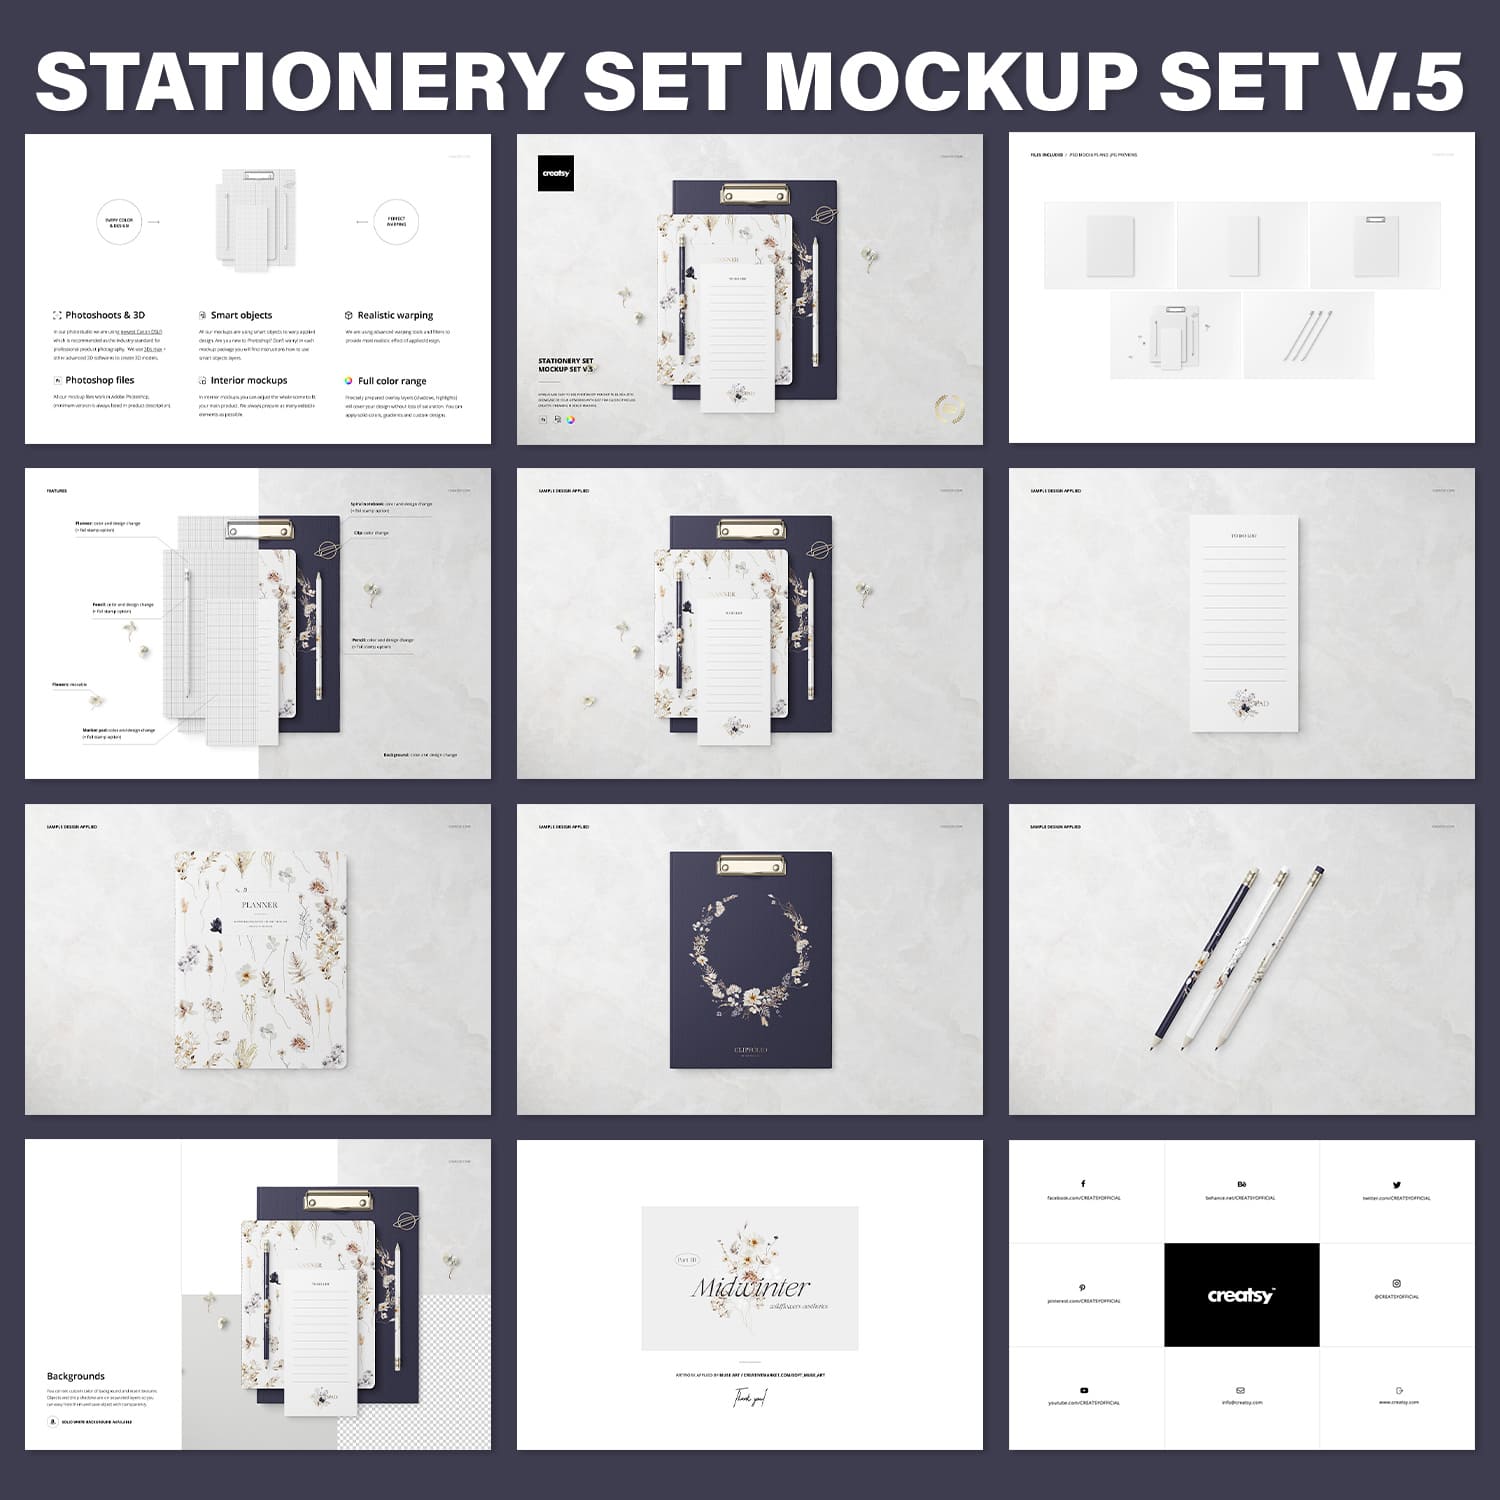 A set of images of stationery with an amazing design.